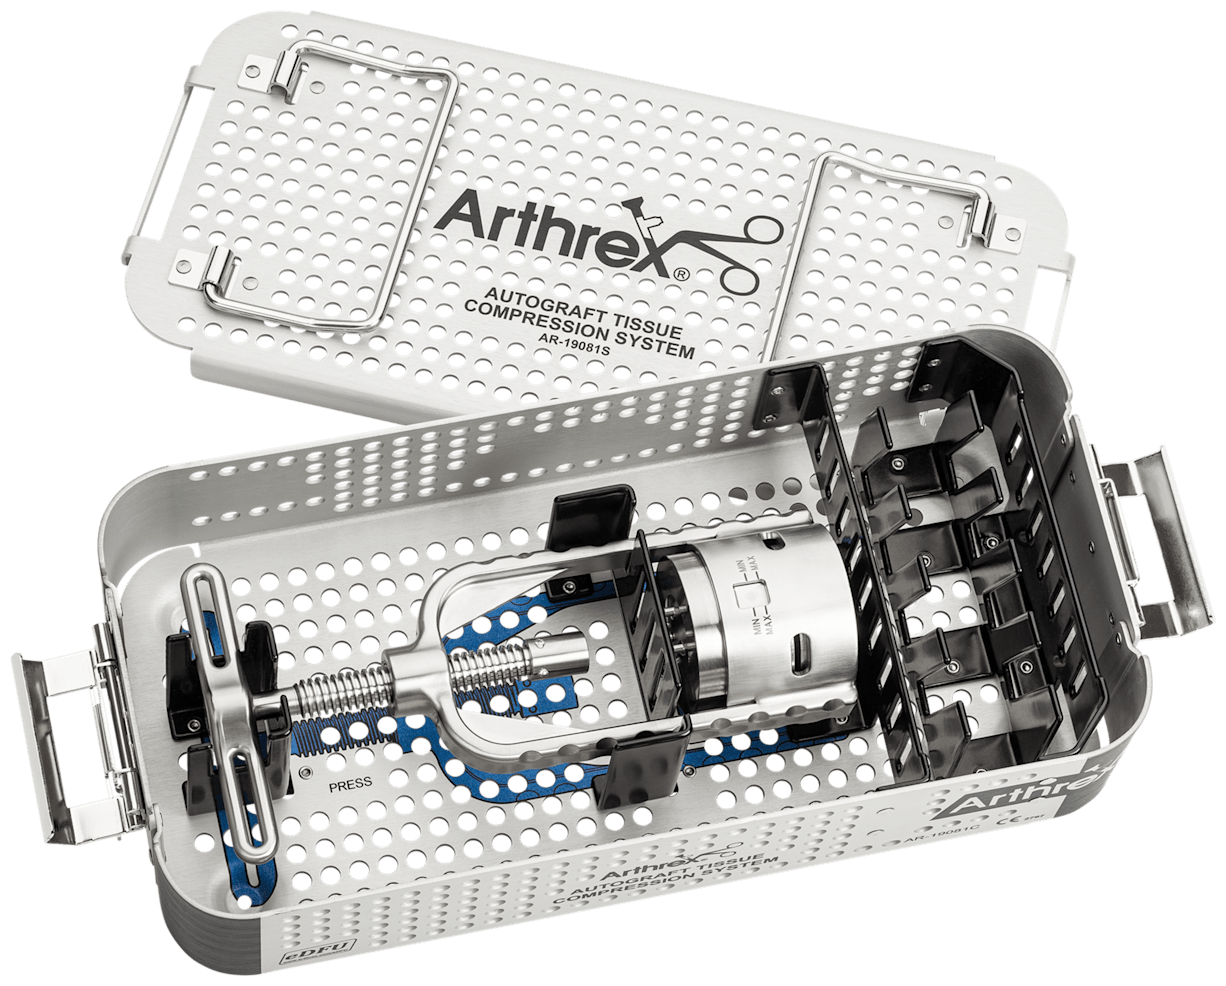 Autograft Tissue Compression System (includes press and case)